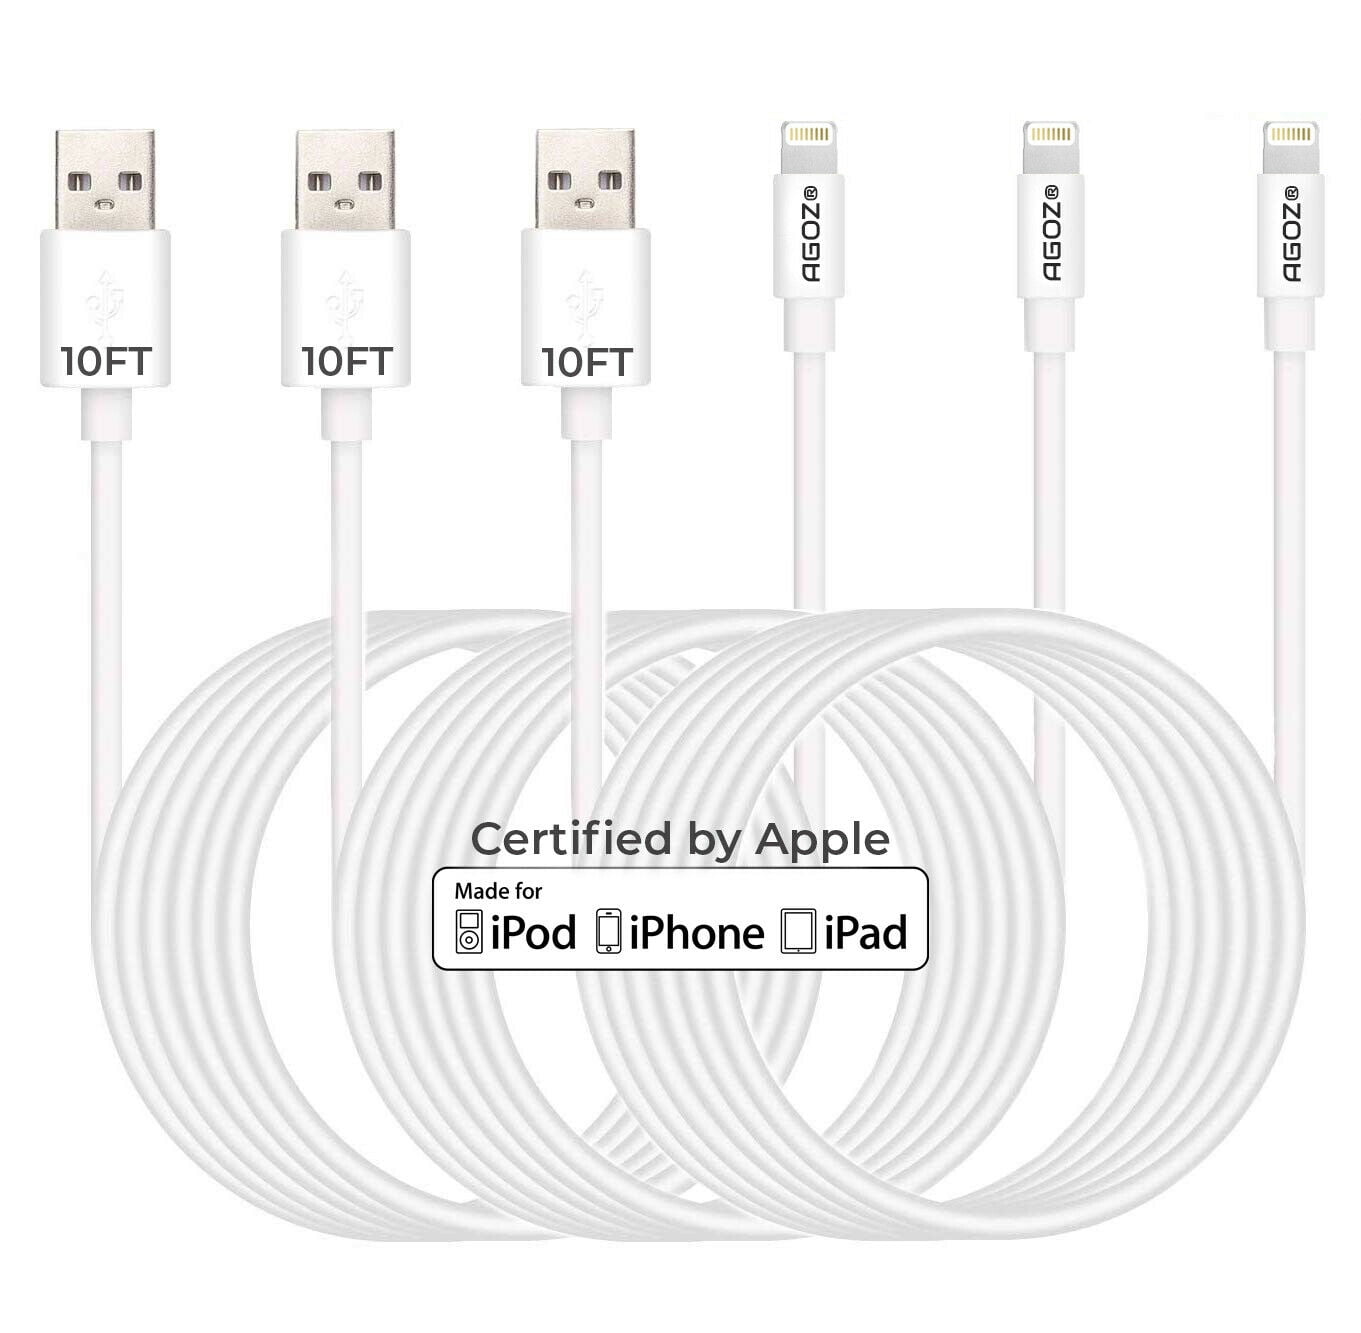 Apple MFi Certified Long Apple Lightning to USB Cable 10 Feet,Fast iPhone Charging Cord 10 Foot for Apple iPhone 13/12/11 Pro/11/XS MAX/XR/8/7/6s/6/5S/SE iPad Original 3Pack 10Ft Apple Charger Cable, 